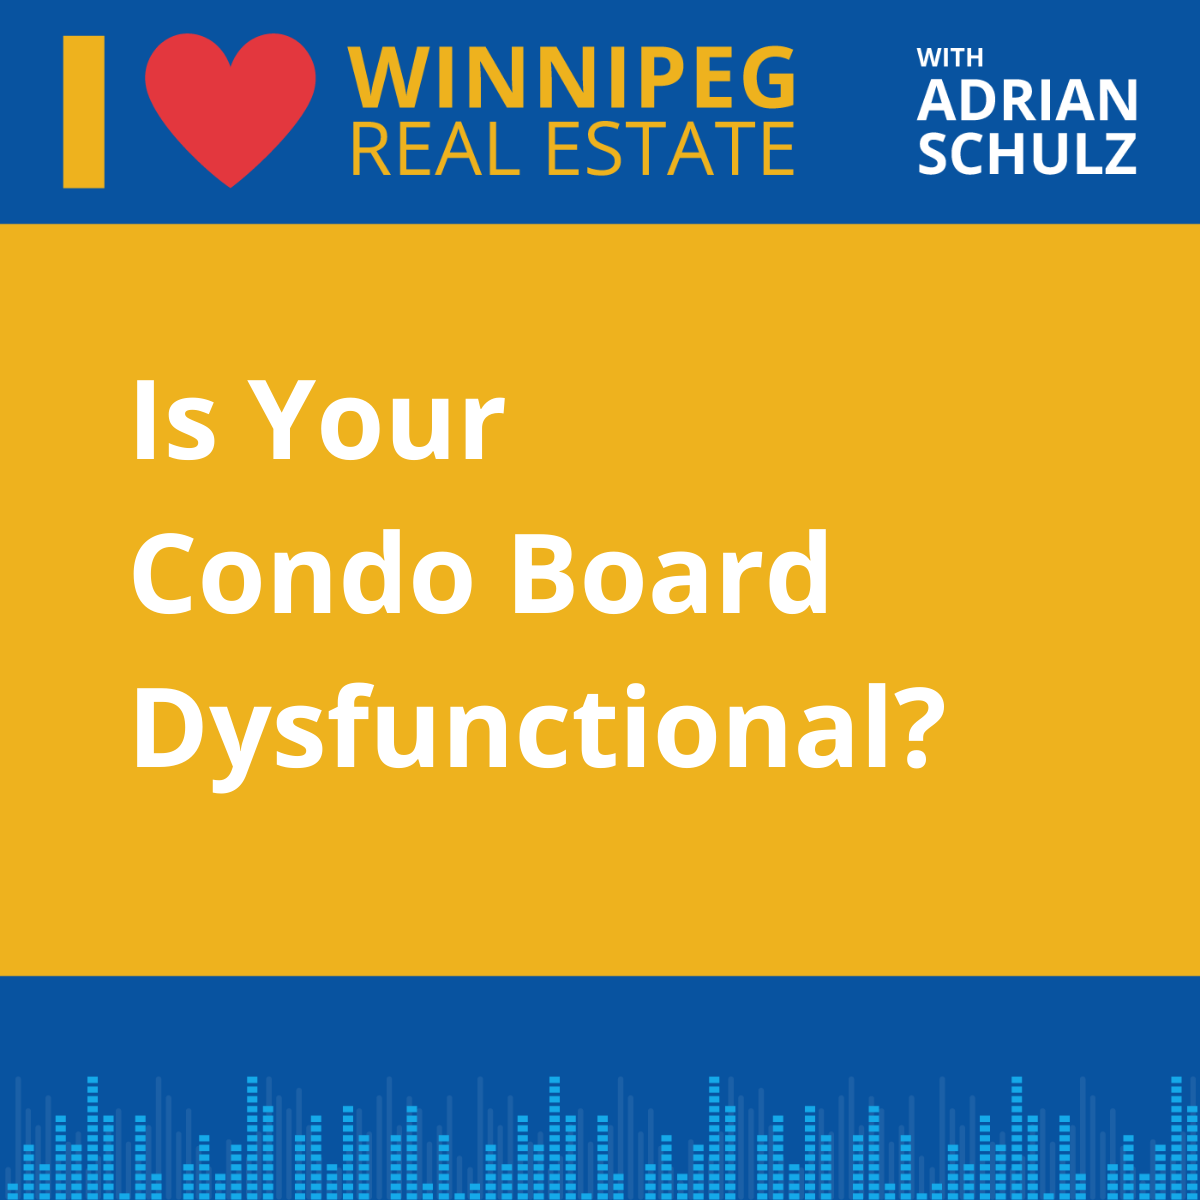 Is Your Condo Board Dysfunctional?